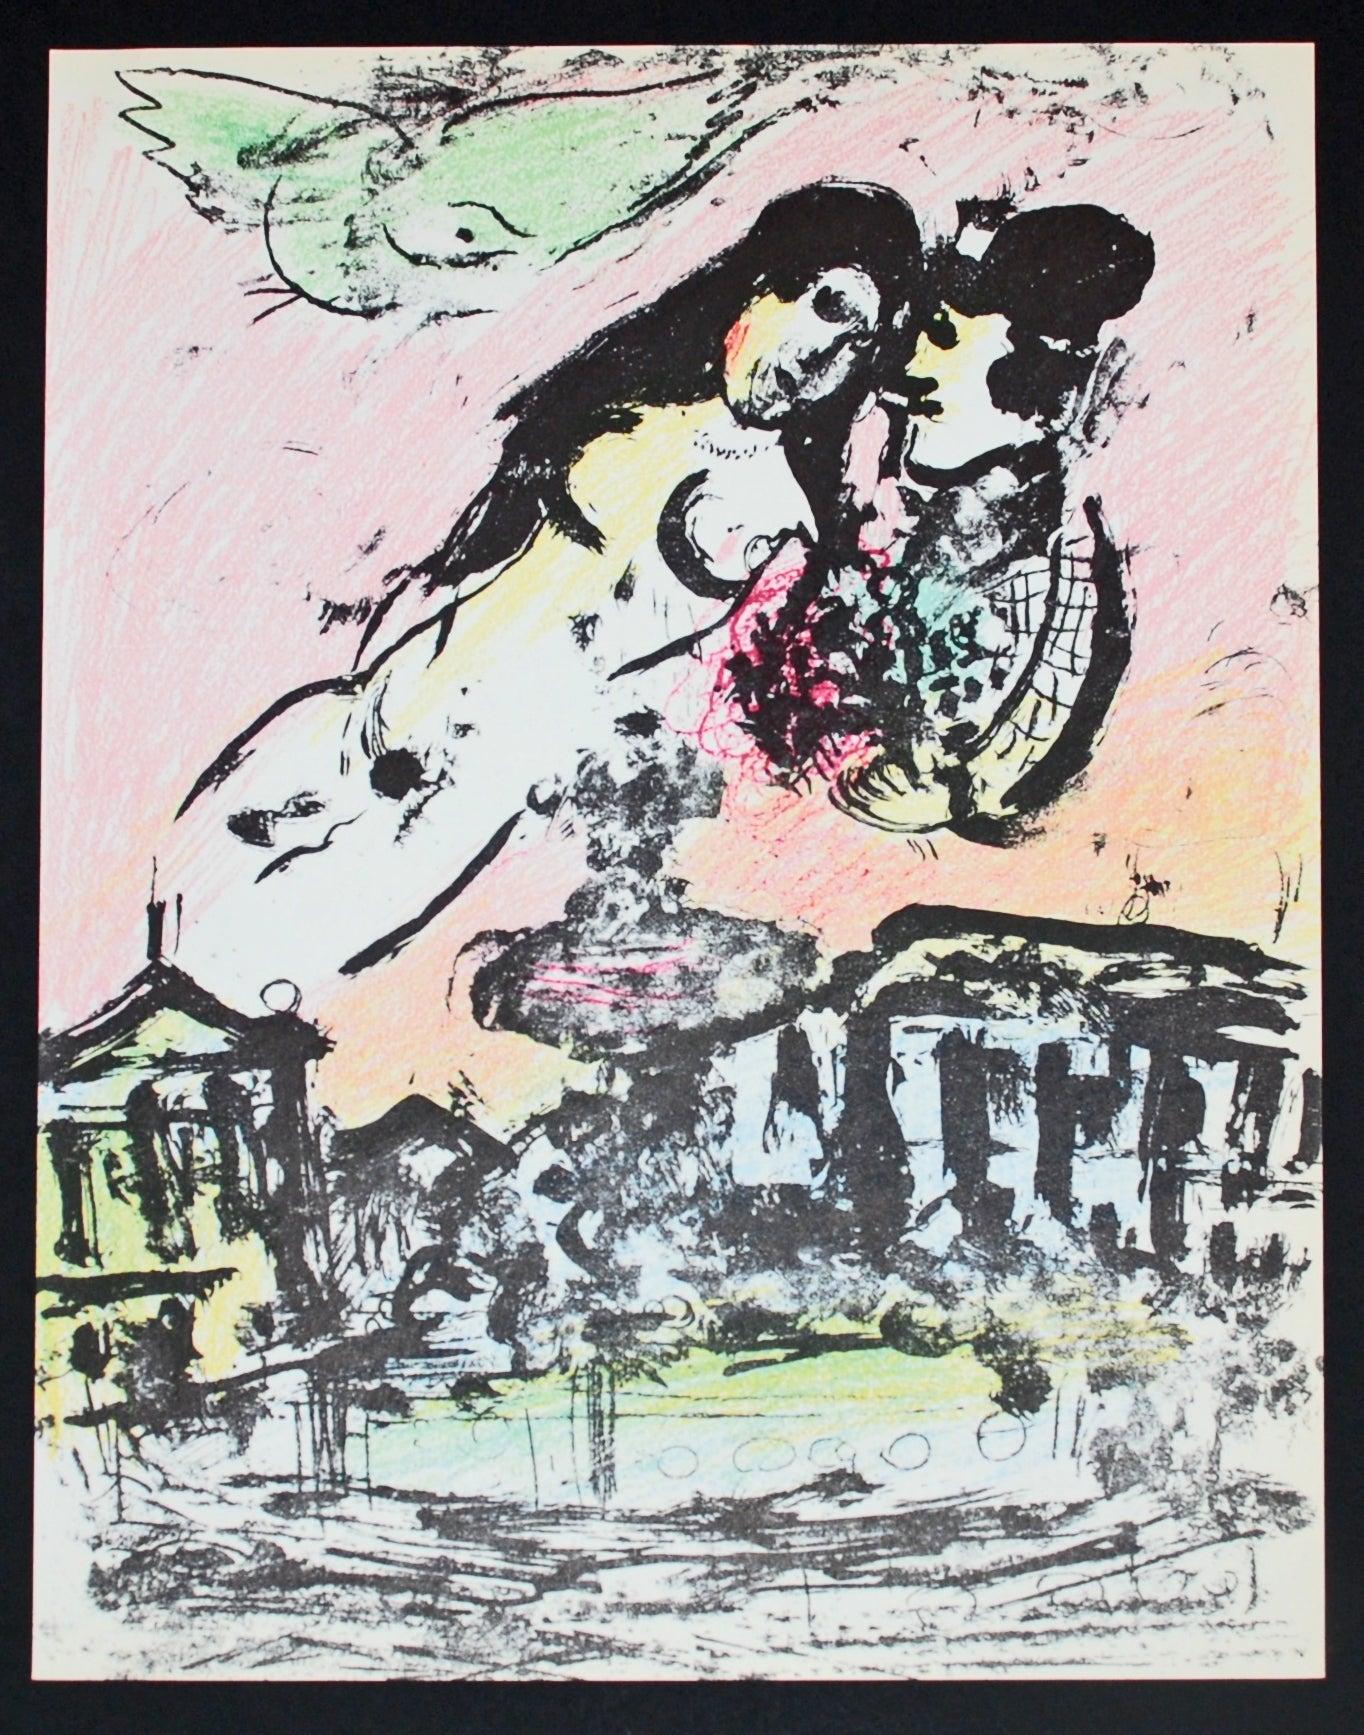 Artist: Marc Chagall
Title: The Lovers' Heaven
Portfolio: Mourlot Lithographe II
Medium: Lithograph
Date: 1963
Edition: Unnumbered
Frame Size: 20 1/2